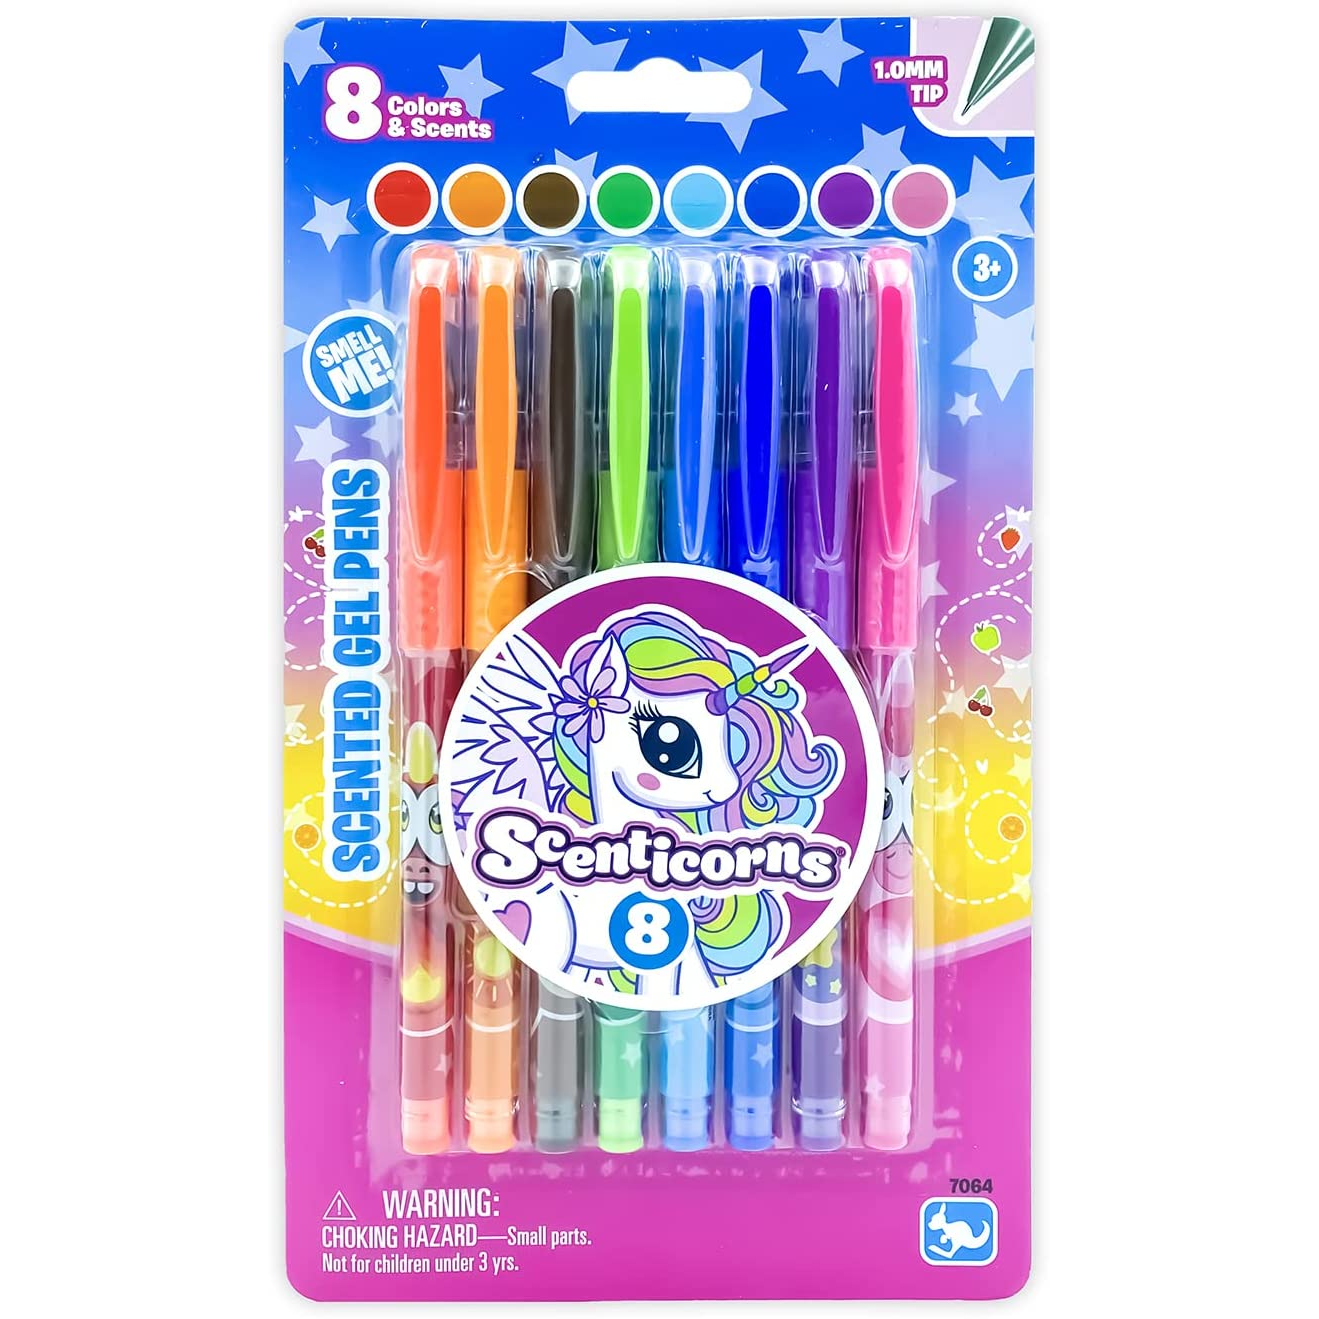 SCENTICORNS® Scented Stationery Gel Pen with grip - 8ct